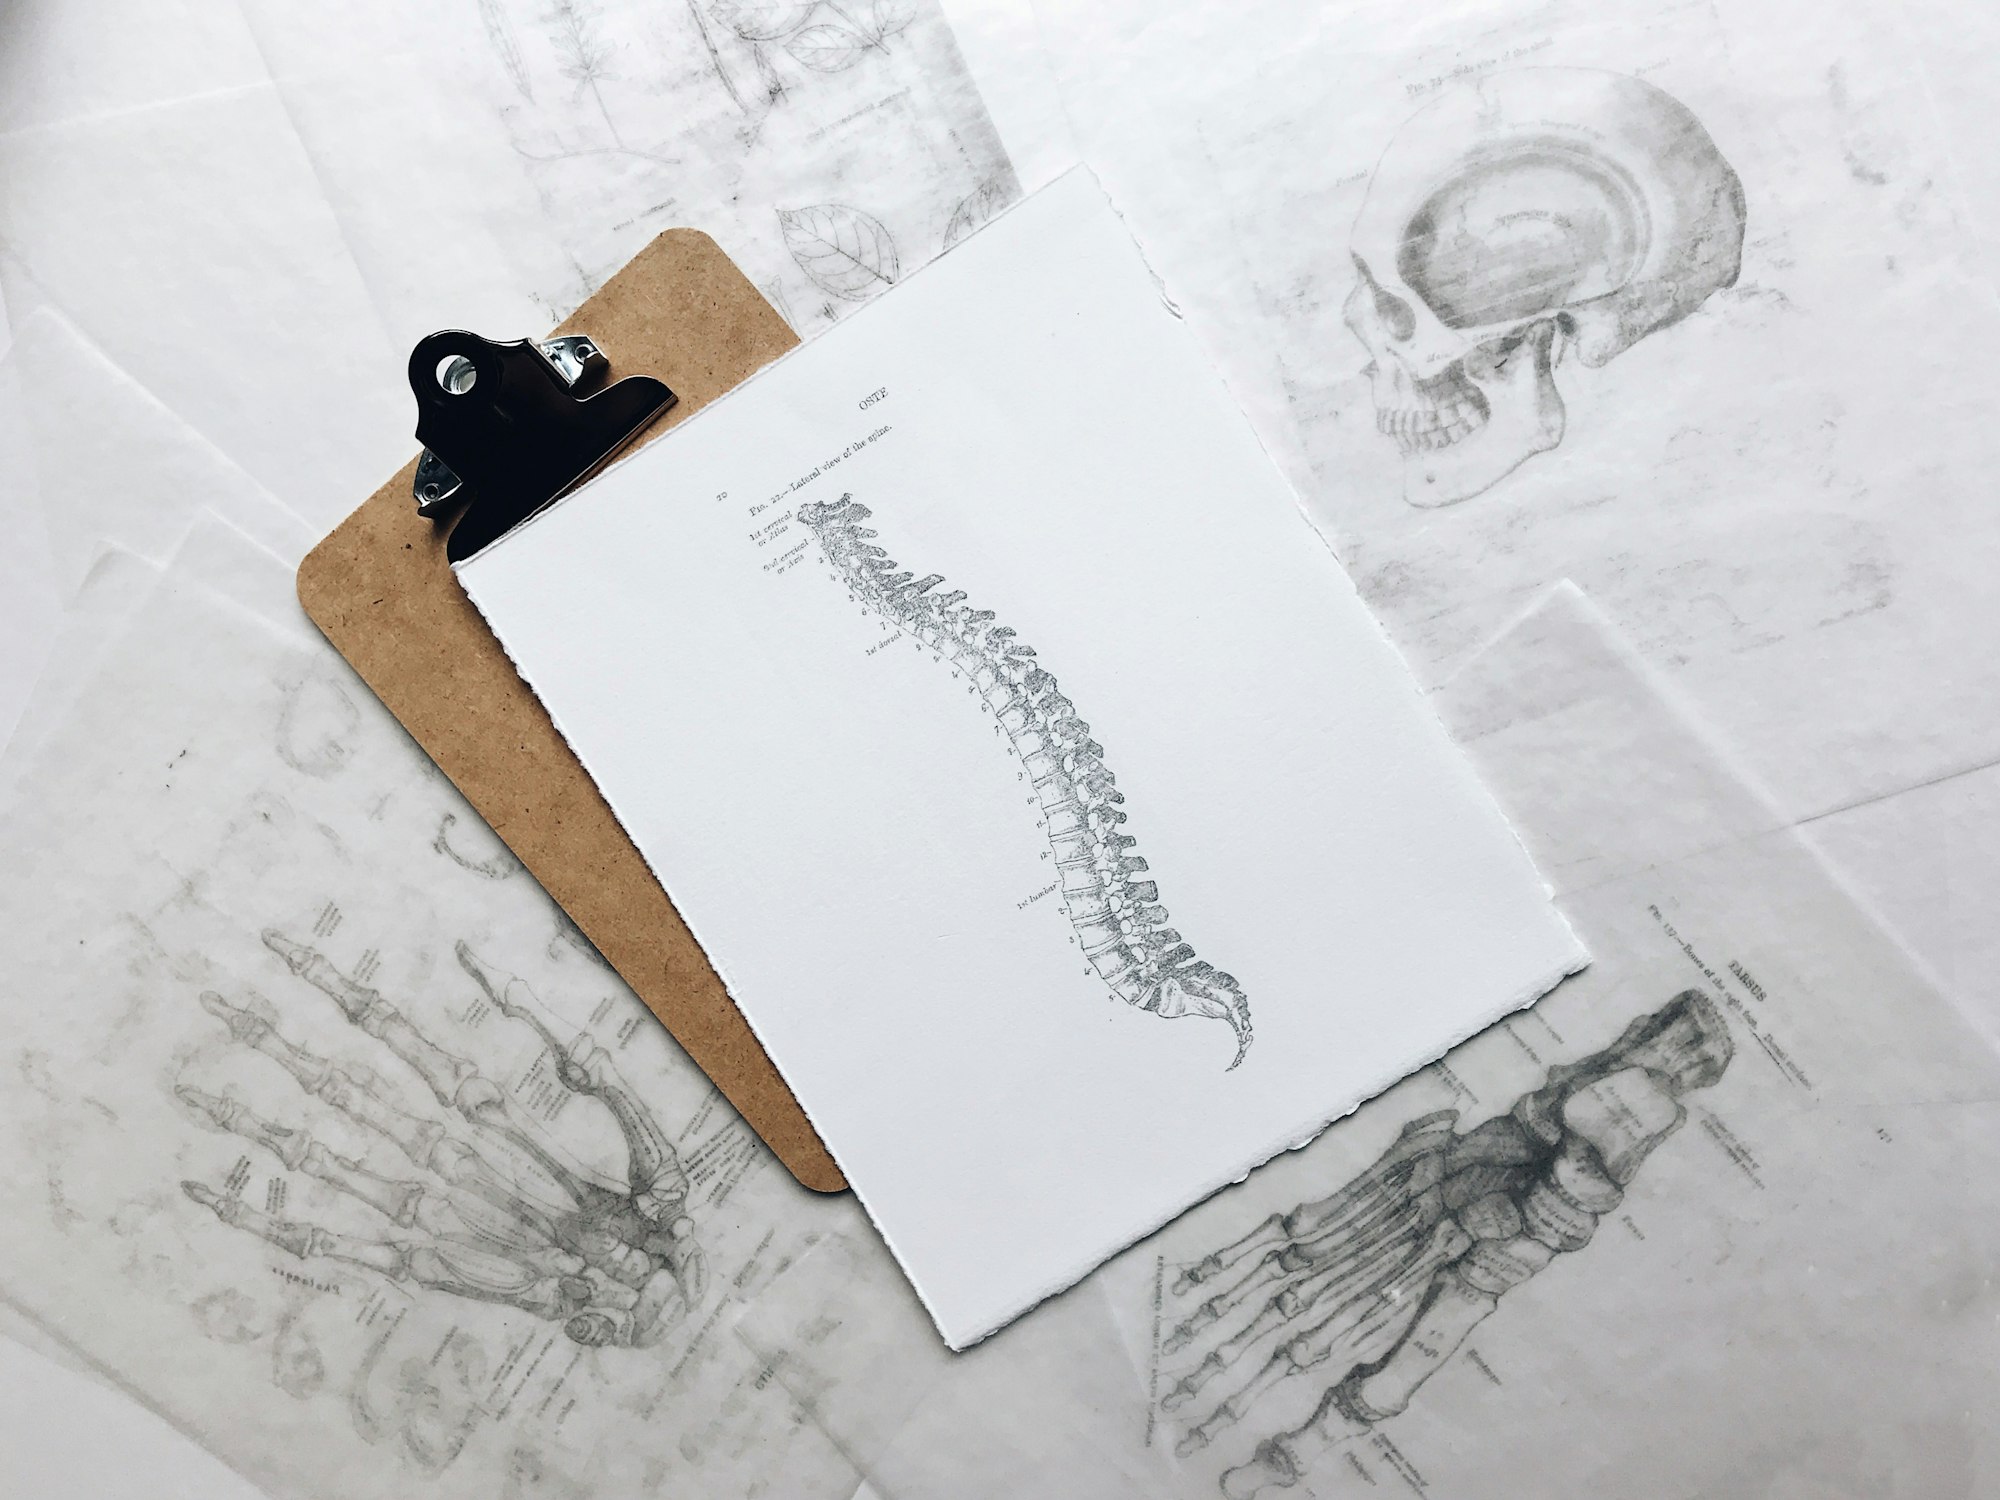 I was feeling some Halloween spirit in studio today after I found some of my old wax transfers of medical drawings! The diagrams are from the Grey’s Anatomy medical book. Happy Halloween!